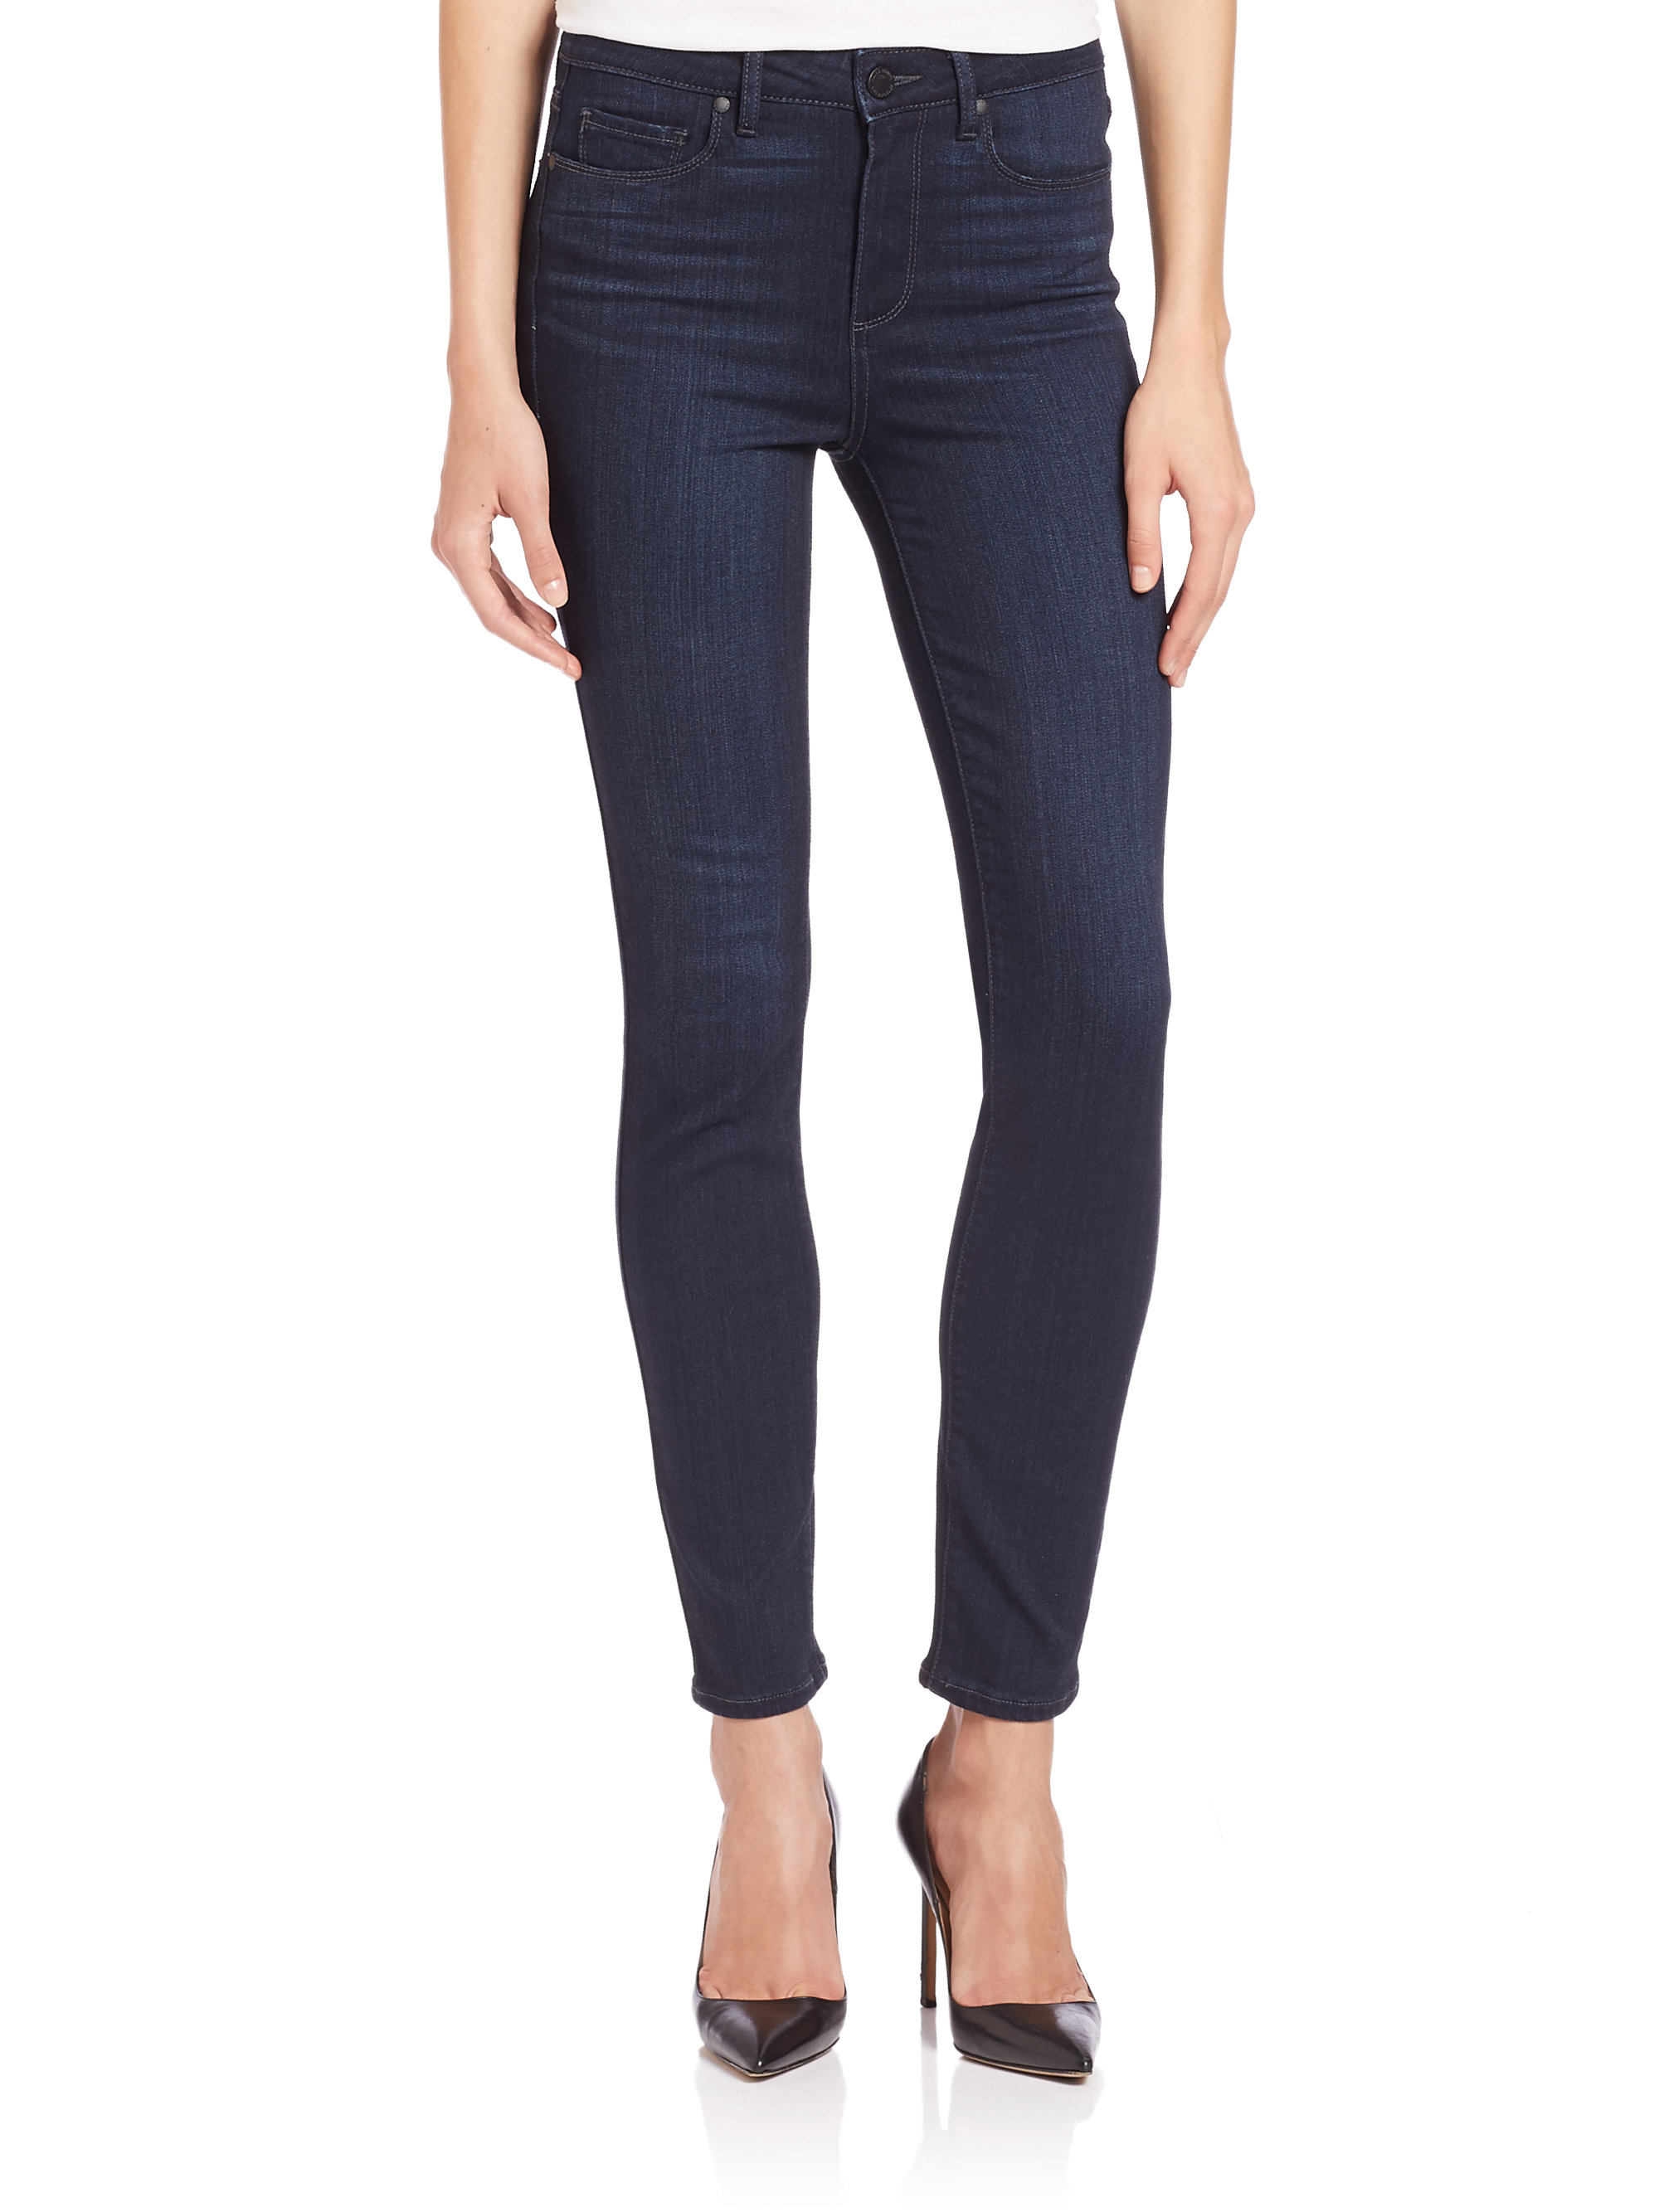 Lyst - Paige Hoxton High-rise Skinny Ankle Jeans in Blue